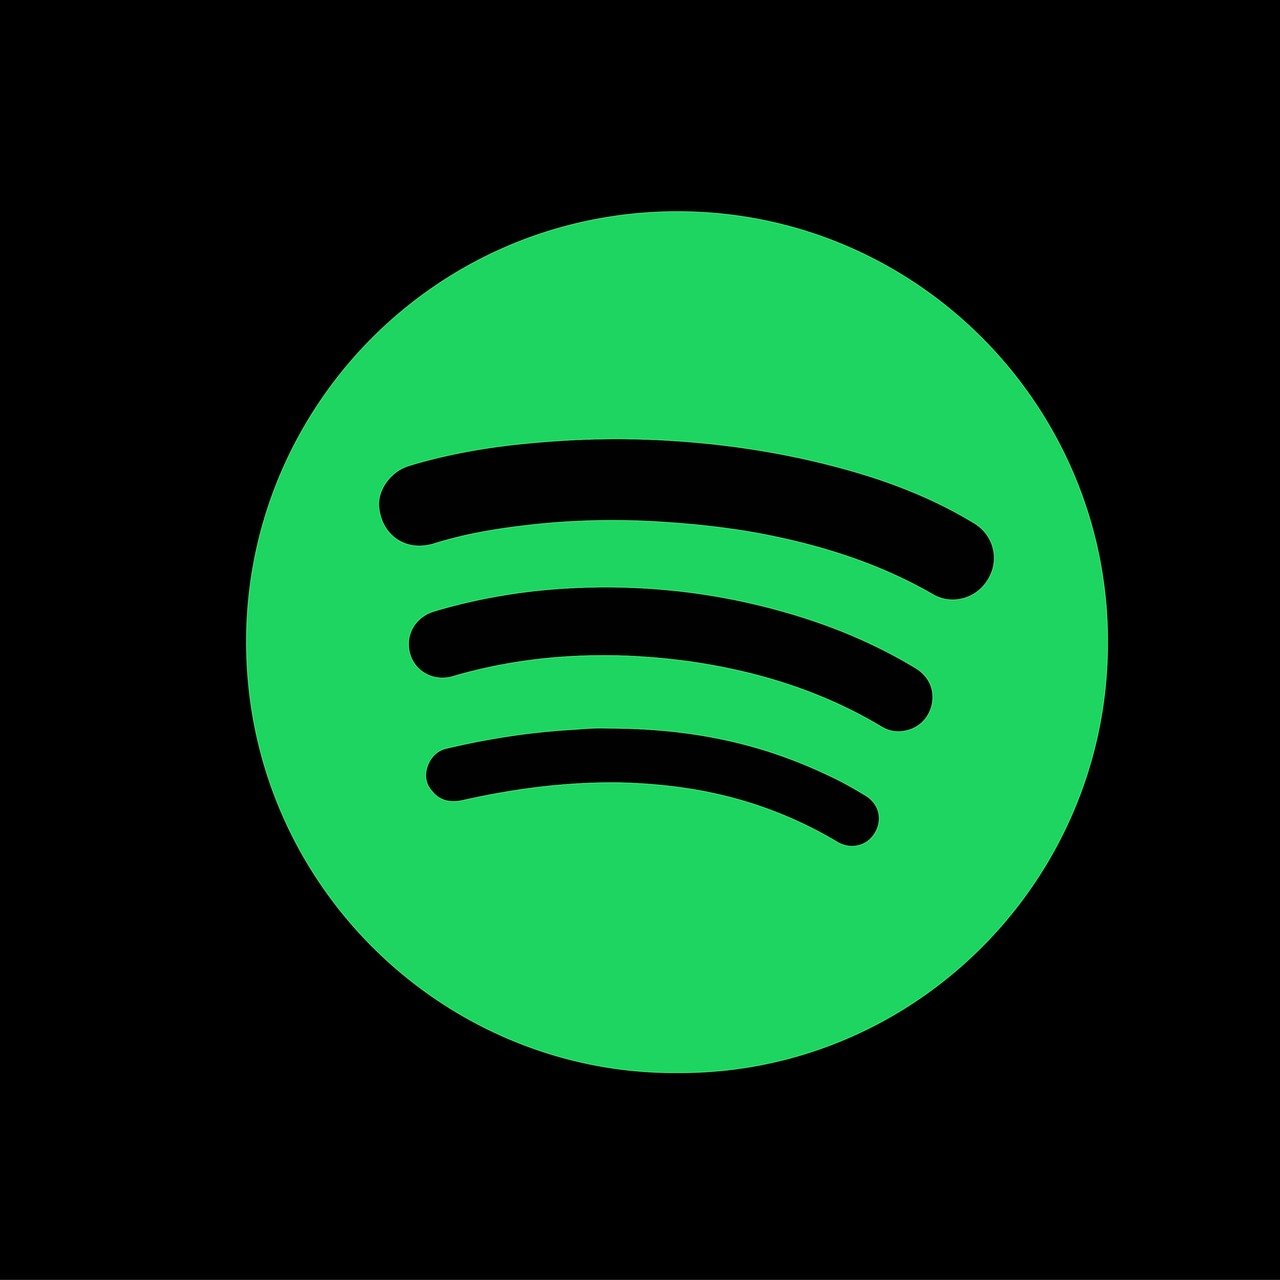 Spotify logo: green circle on black background with three black lines inside the circle